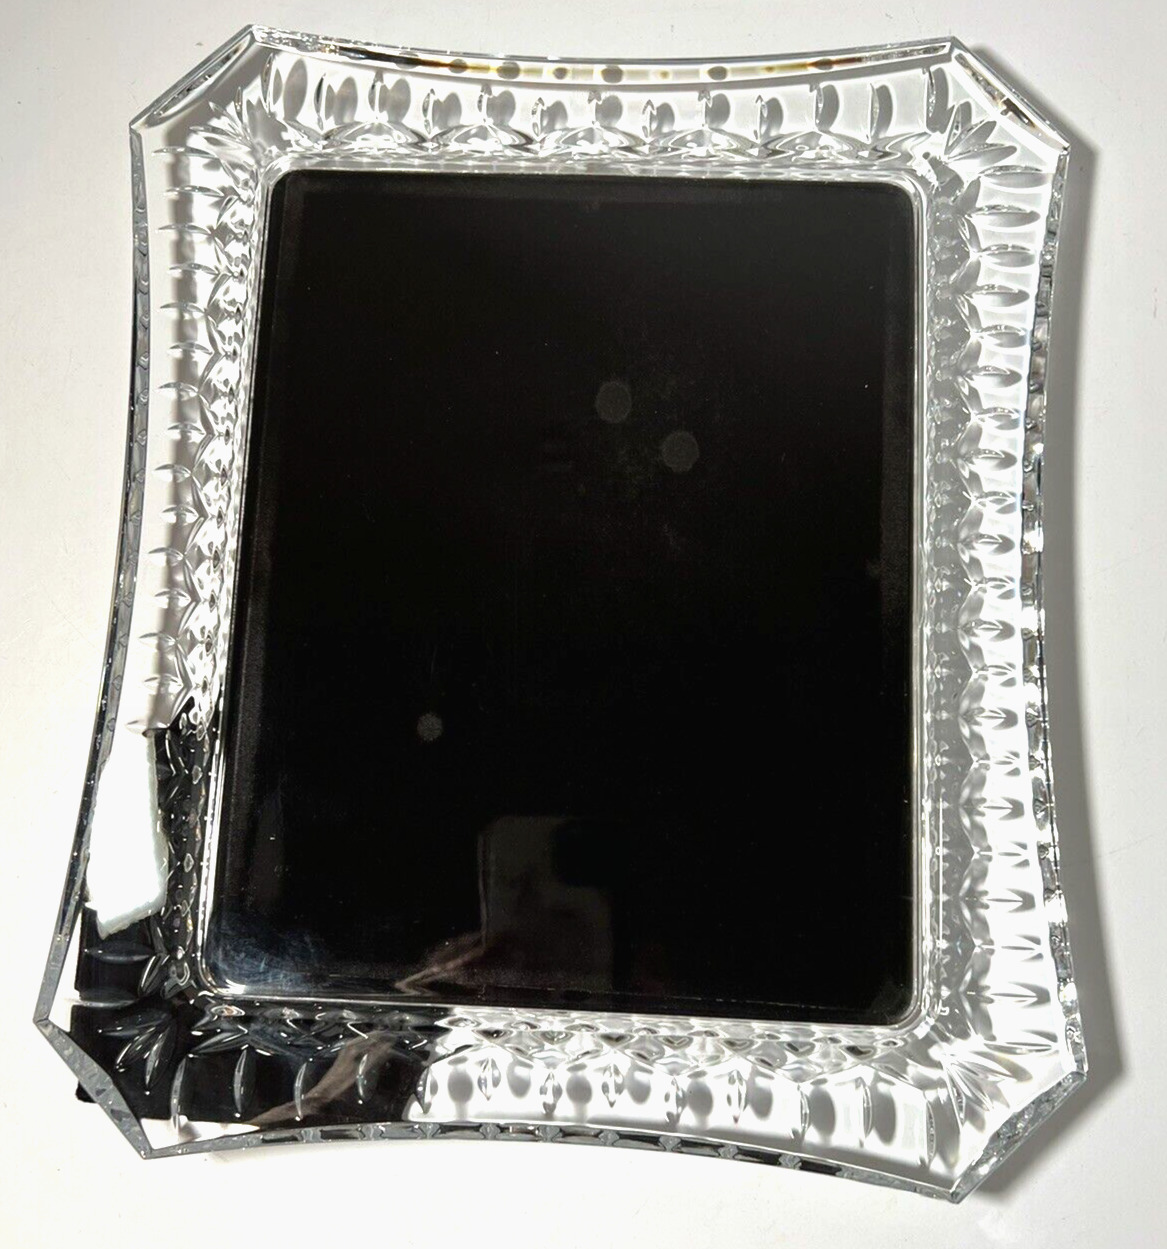 Waterford Crystal, Lismore 8x10 Diamond & Wedge Cut Picture Frame